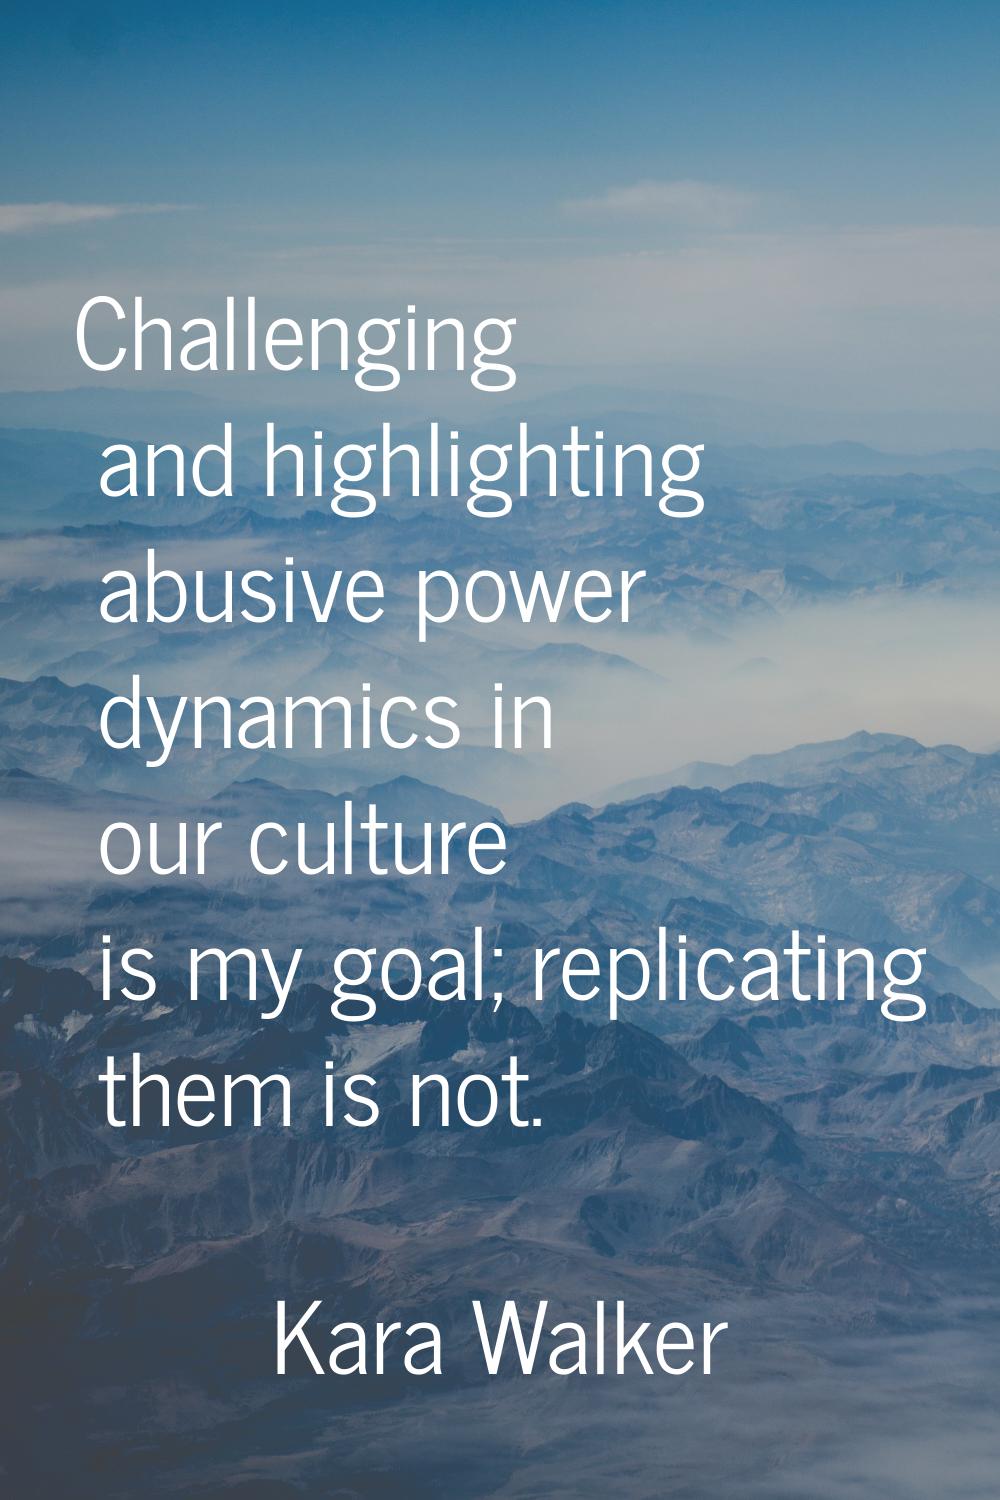 Challenging and highlighting abusive power dynamics in our culture is my goal; replicating them is 